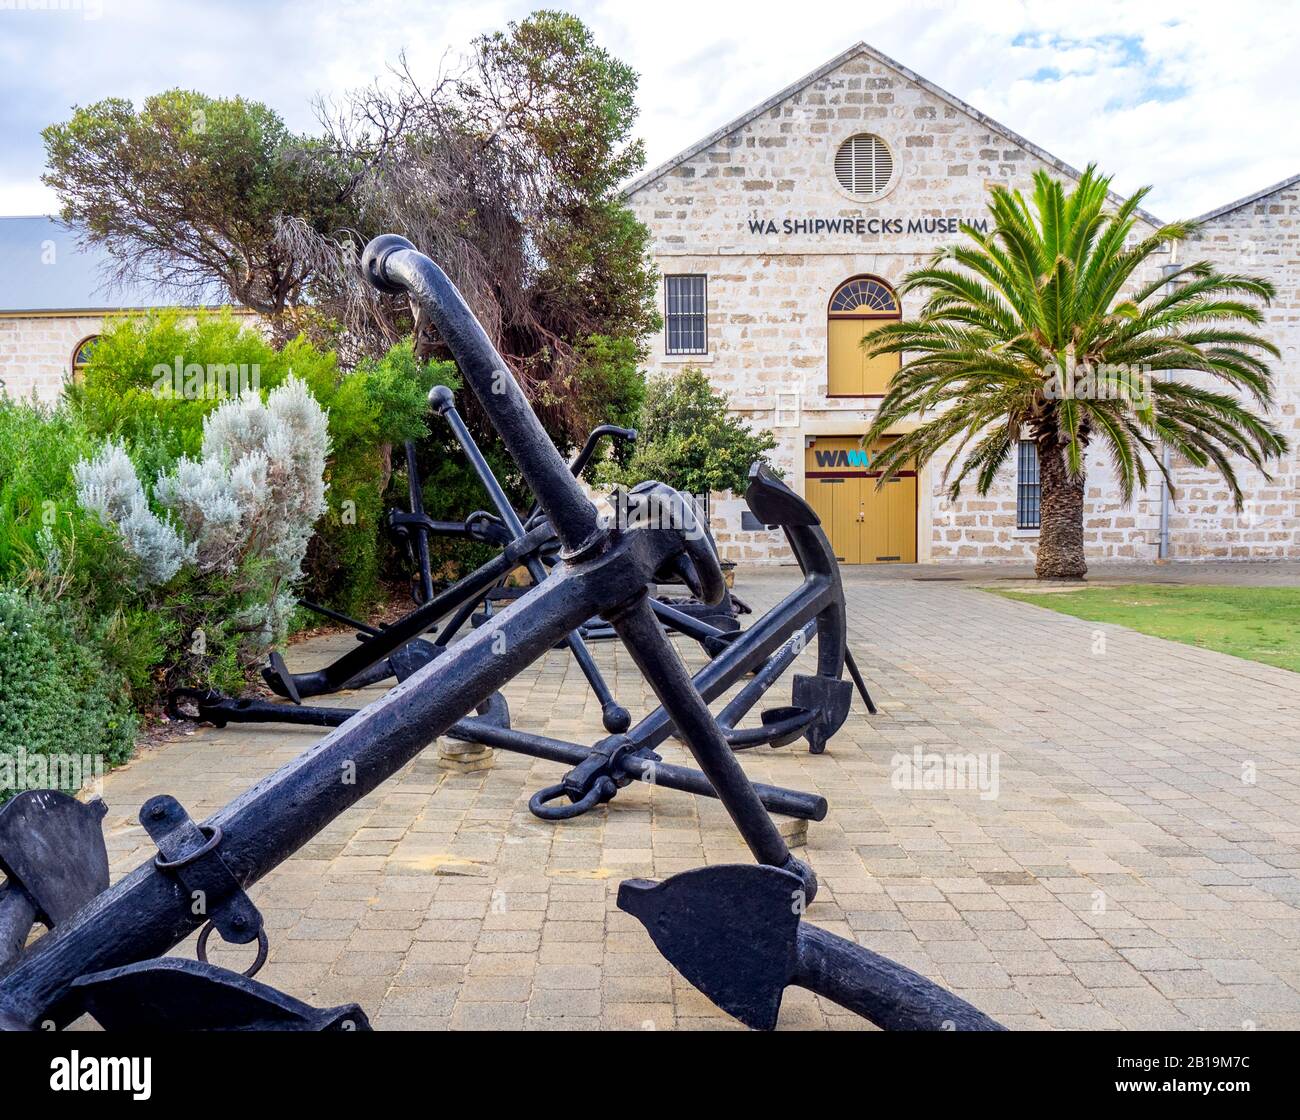 Large anchors outside the WA Shipwrecks Museum housed in convict built limestone buildings in Fremantle Western Australia. Stock Photo